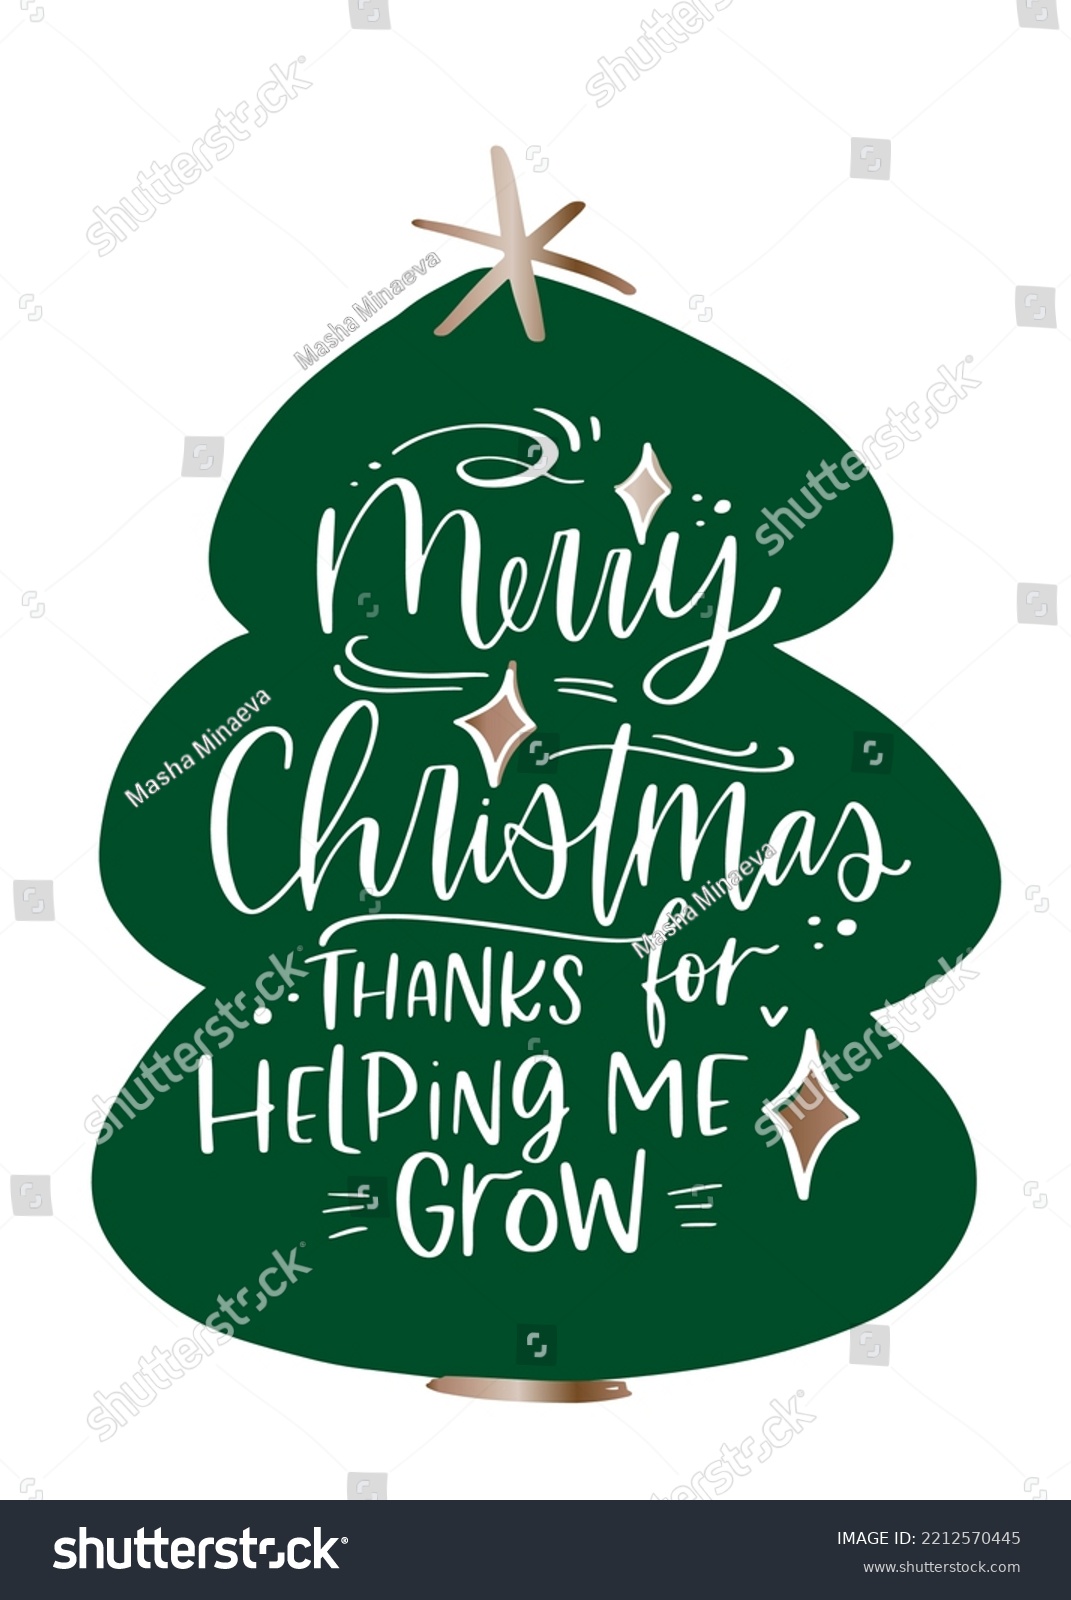 SVG of Merry Christmas teacher appreciation card. Thanks for helping me grow modern calligraphy phrase on Christmas tree silhouette for winter holidays gift decoration. svg